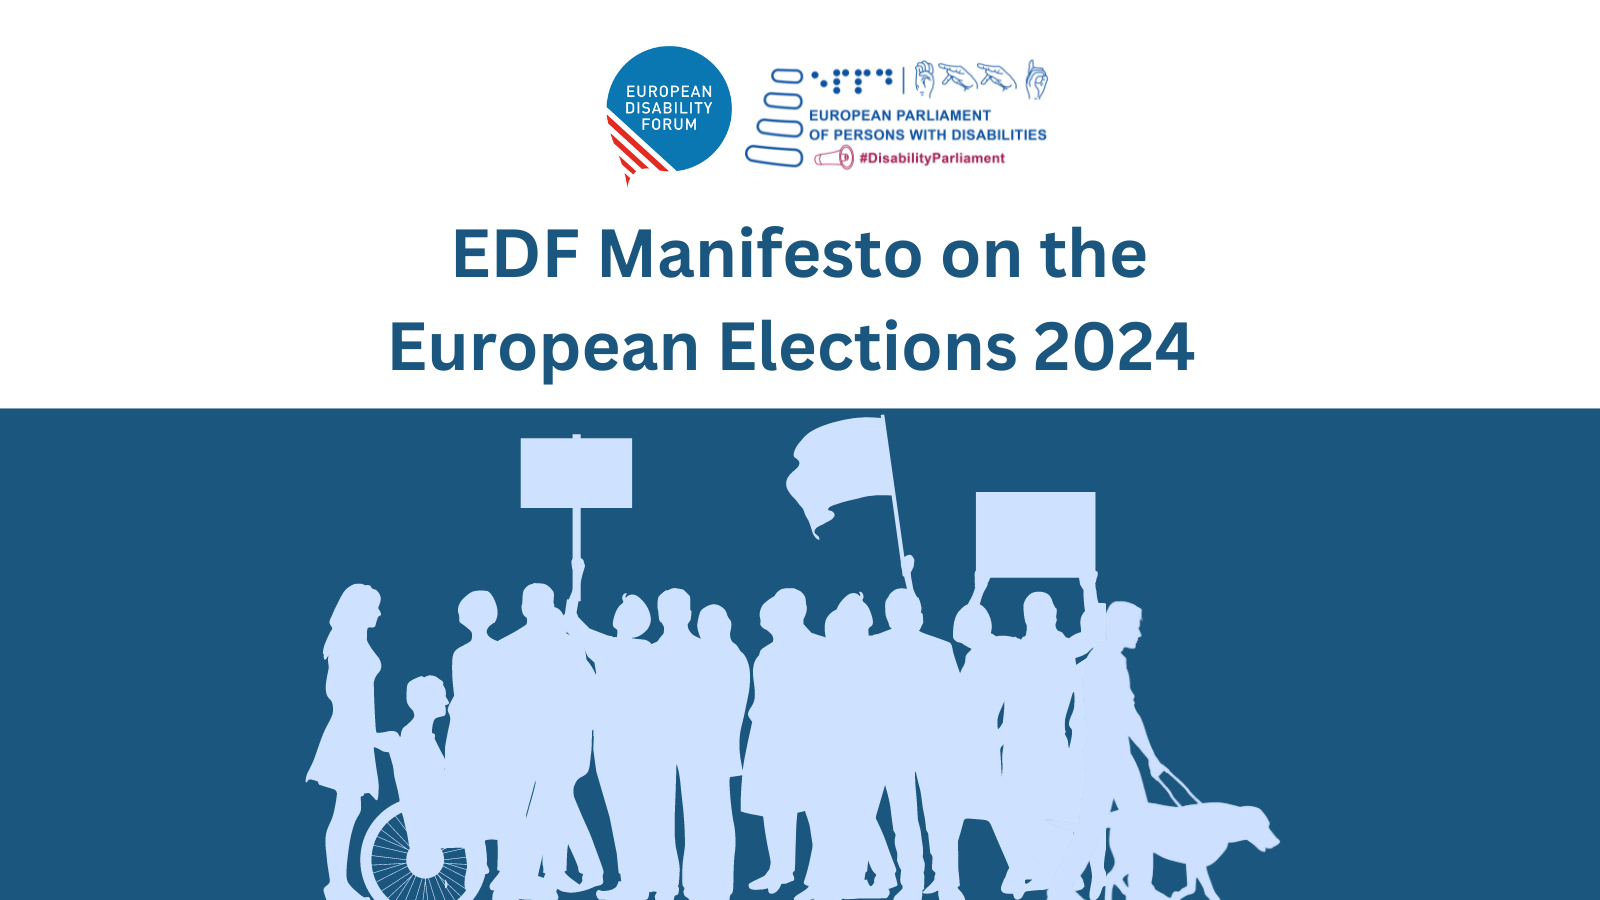 EDF Manifesto on the European Elections 2024 "Building an inclusive